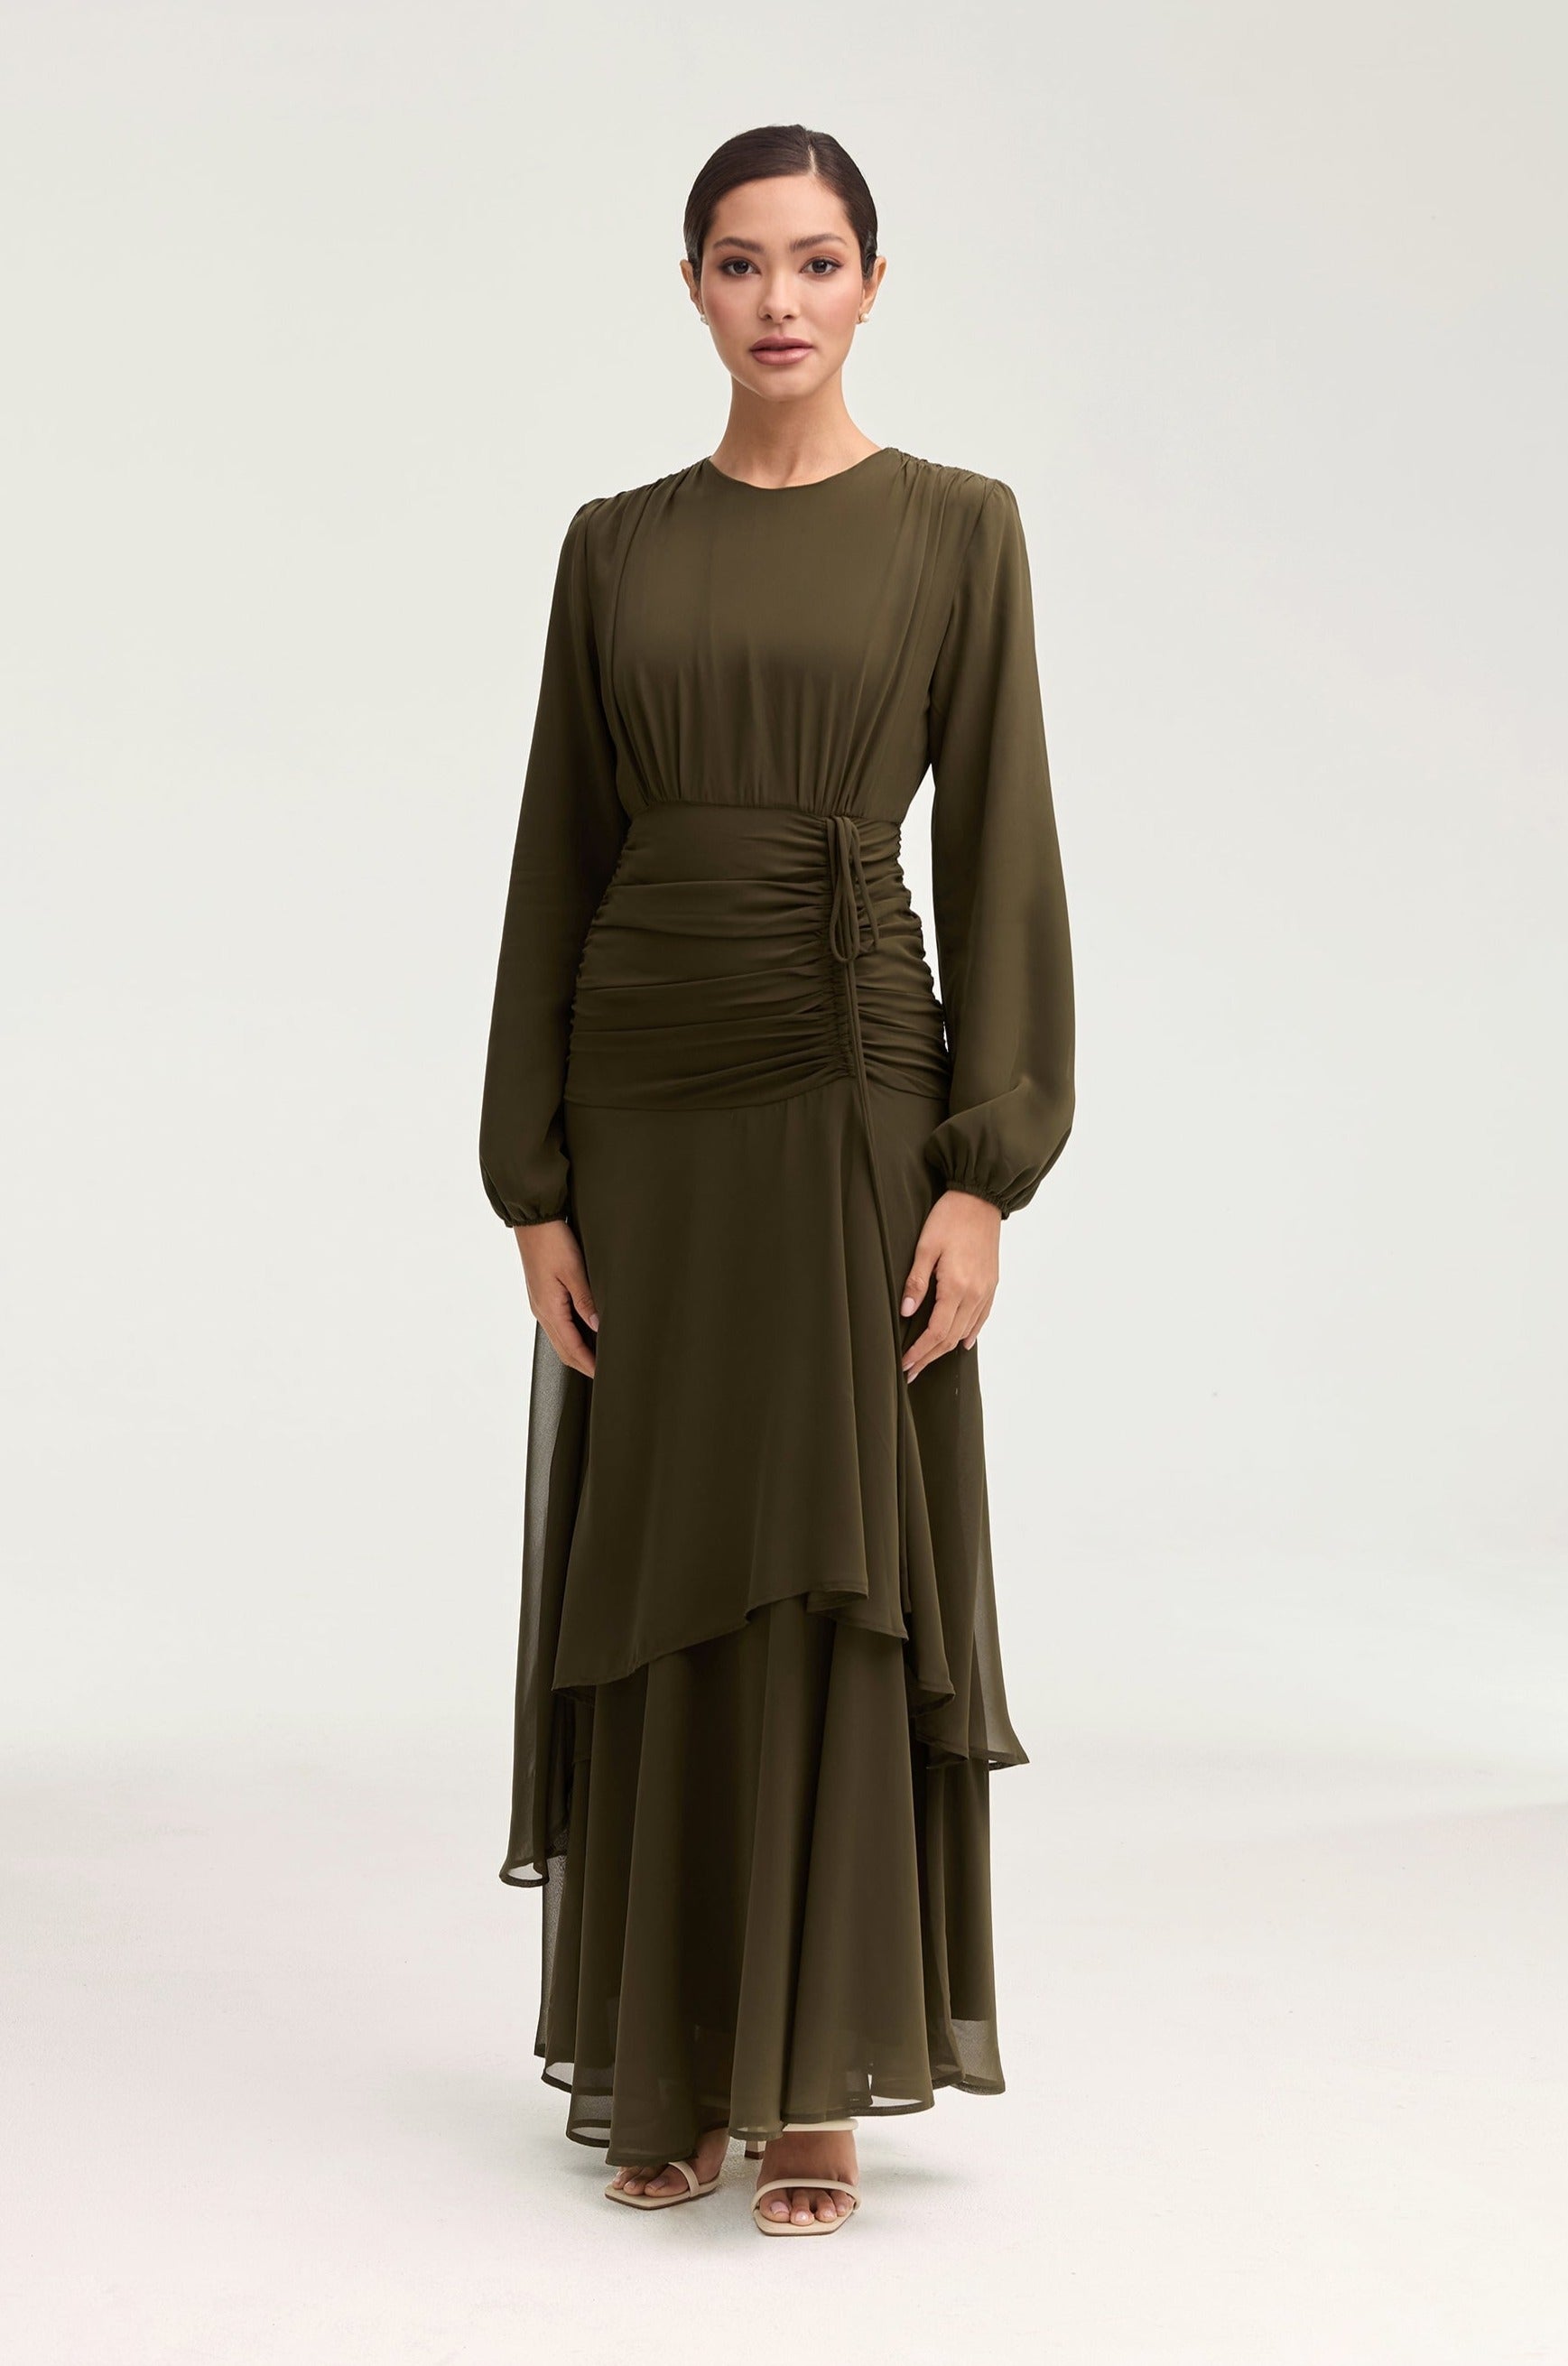 Narjis Side Rouched Maxi Dress - Olive Clothing epschoolboard 